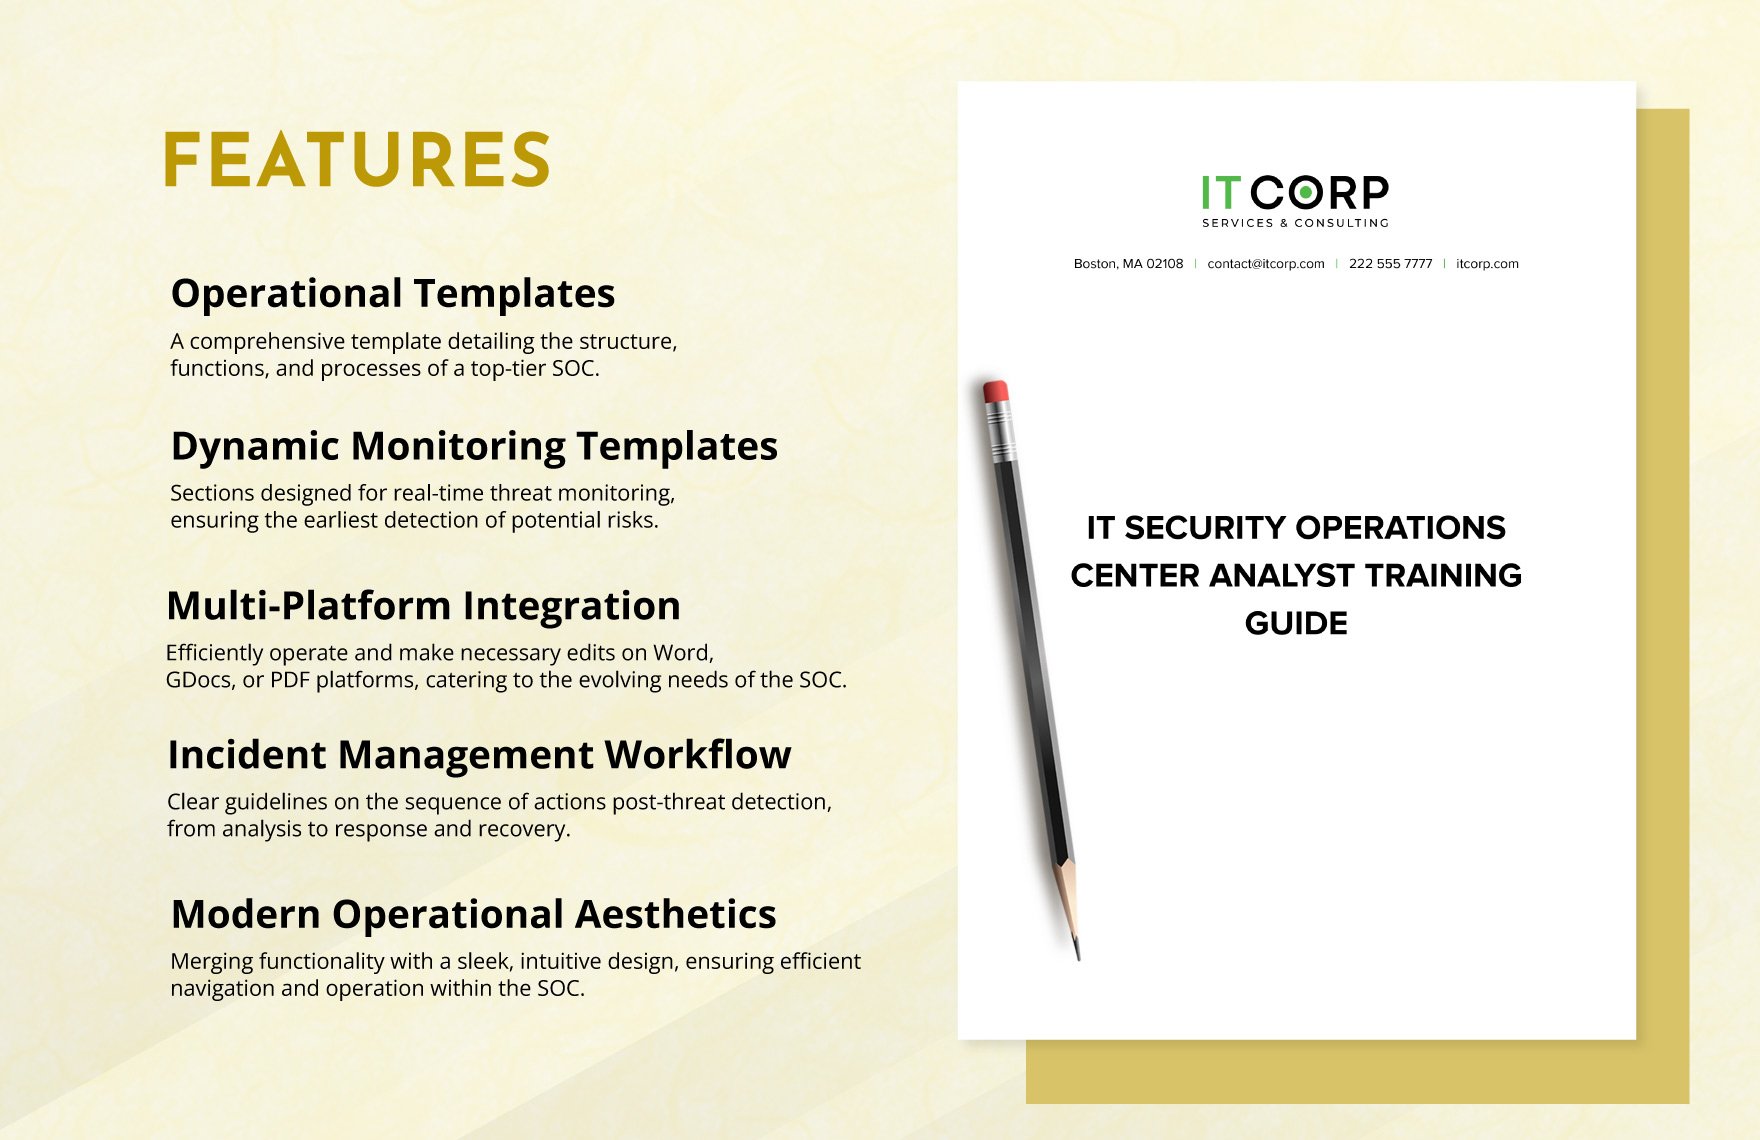 IT Security Operations Center Analyst Training Guide Template